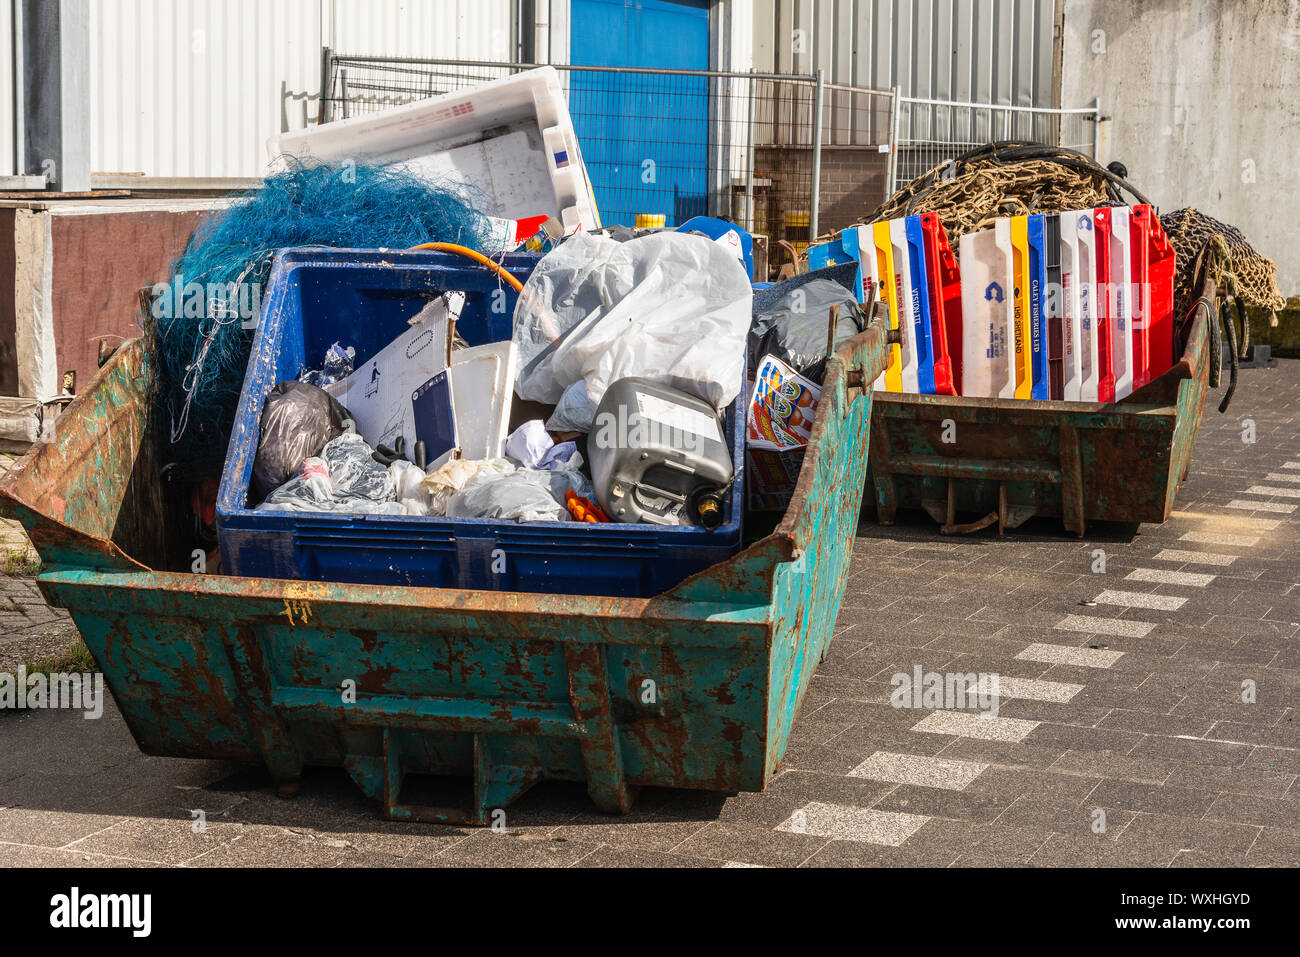 two large steel waste containers filled with plastic bins and plastic fish crates Stock Photo